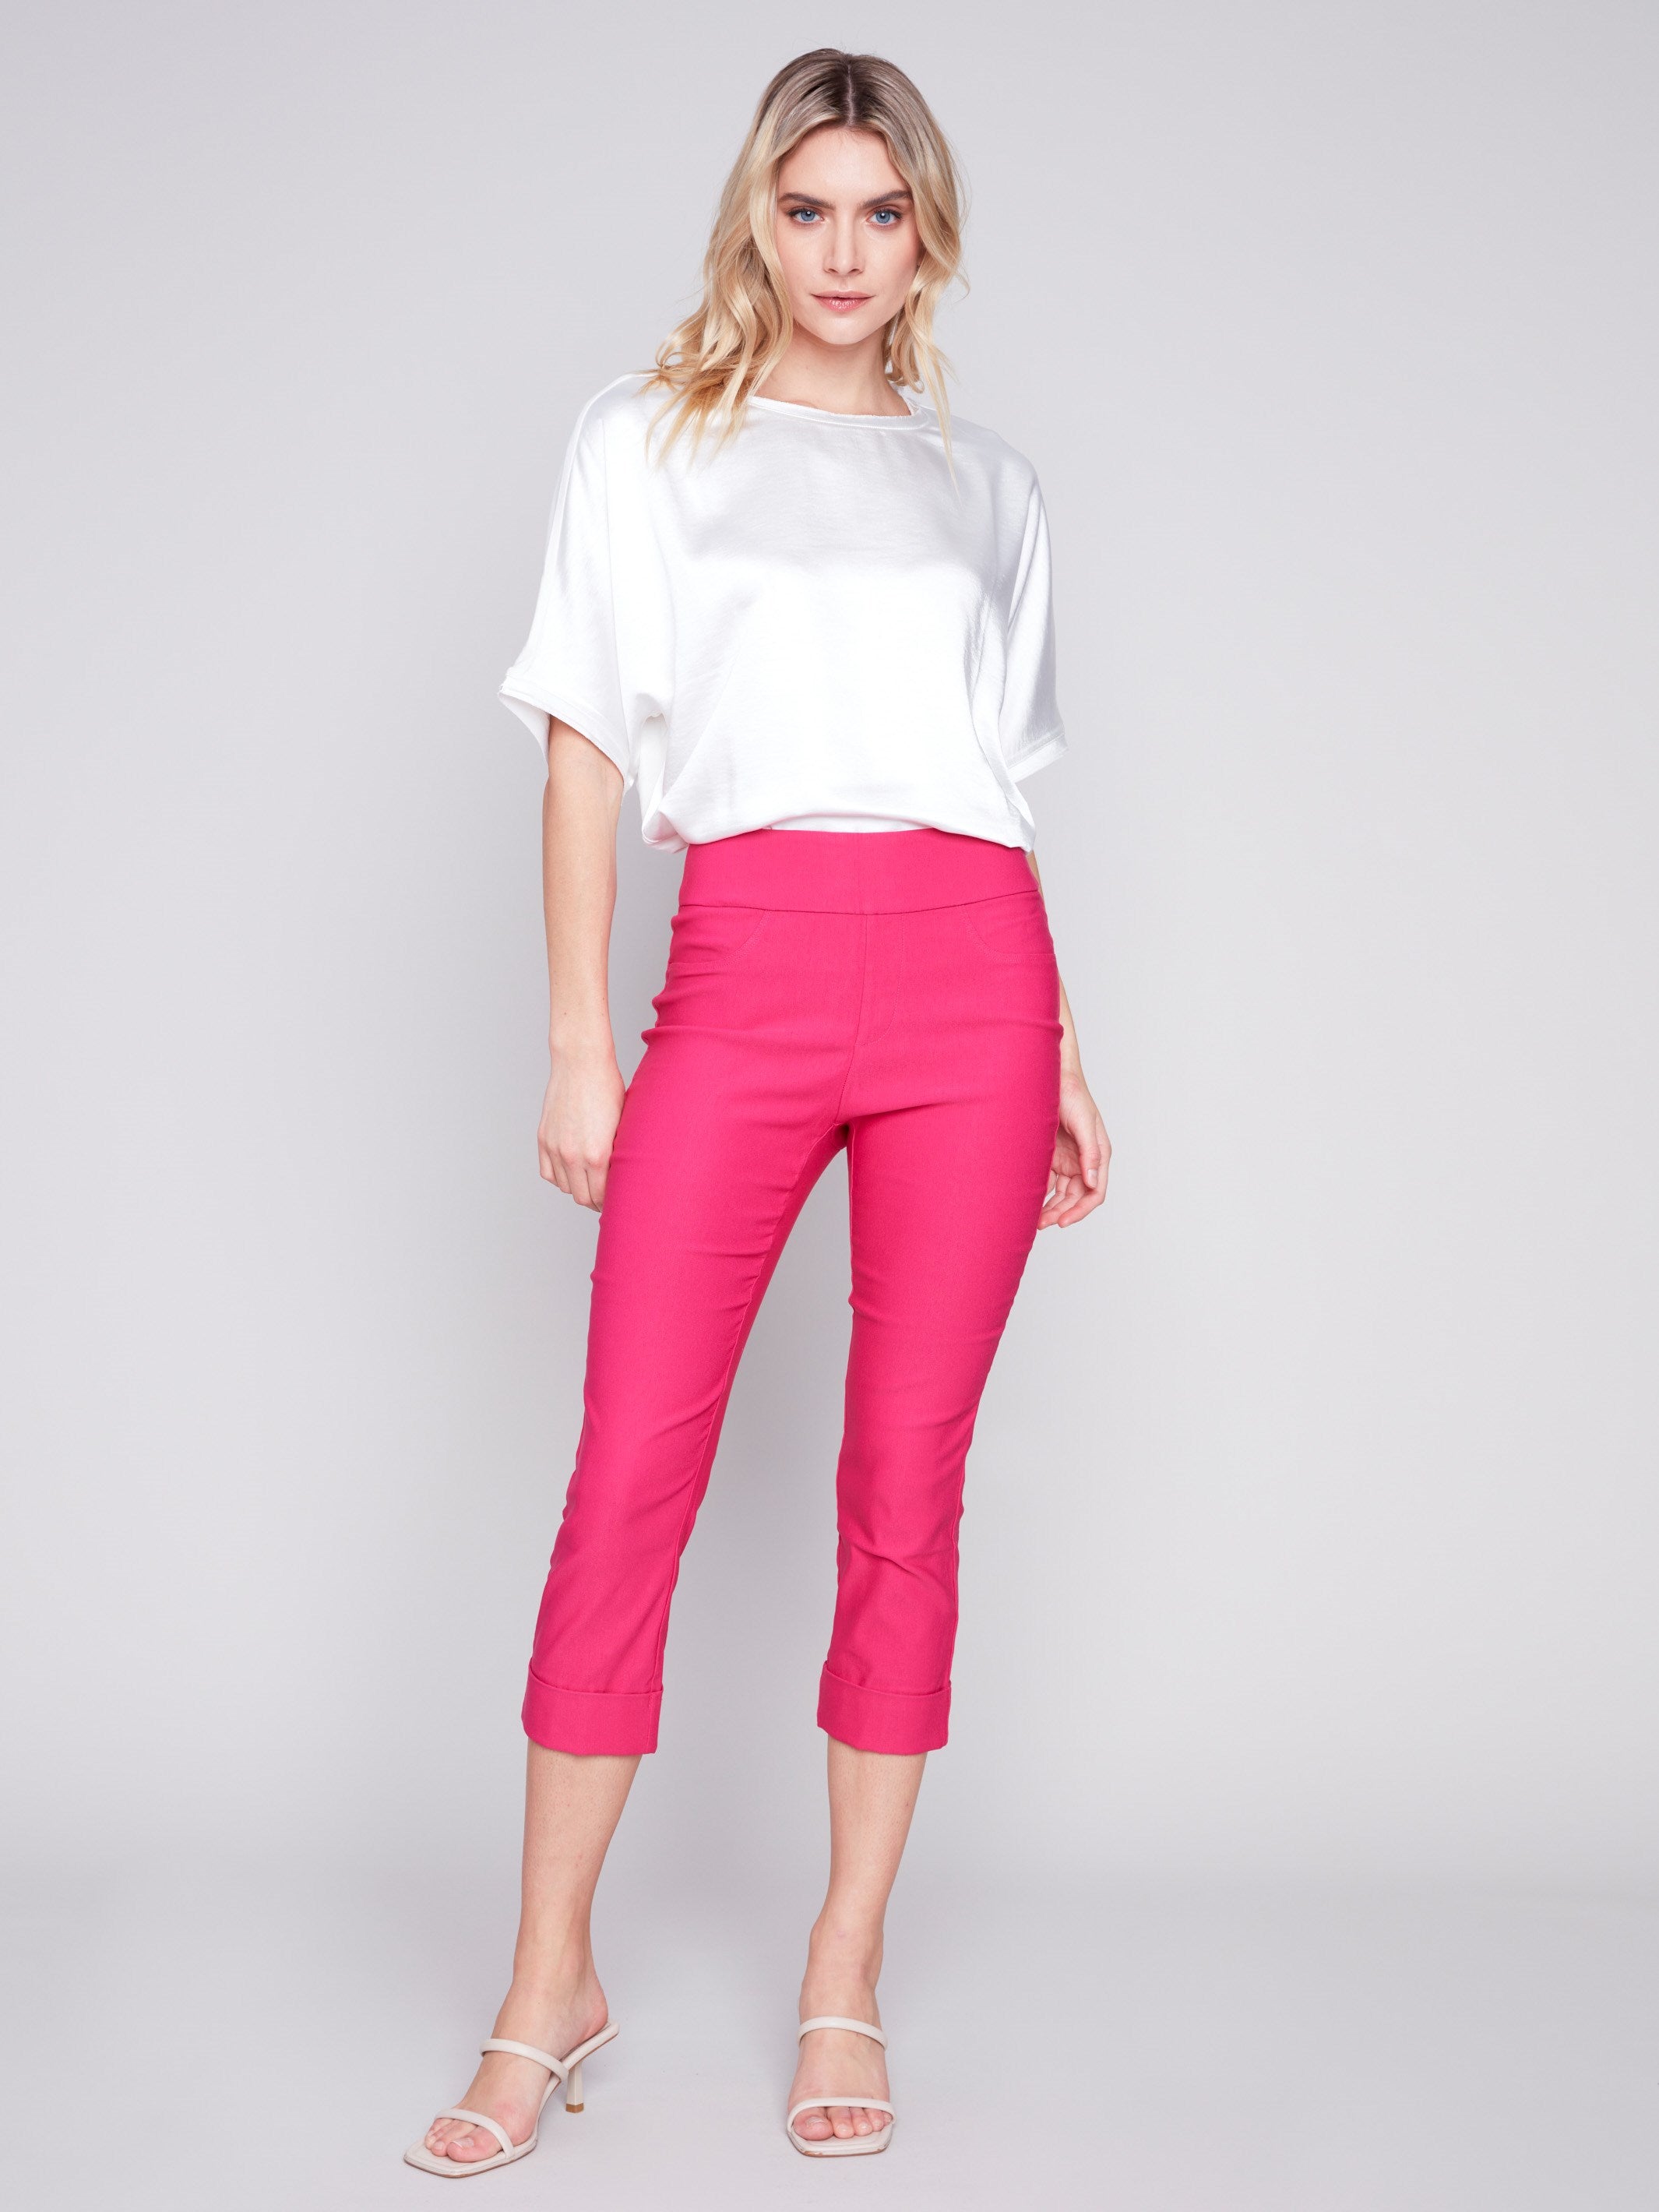 Stretch Pull-On Capri Pants - Punch - Charlie B Collection Canada - Image 1